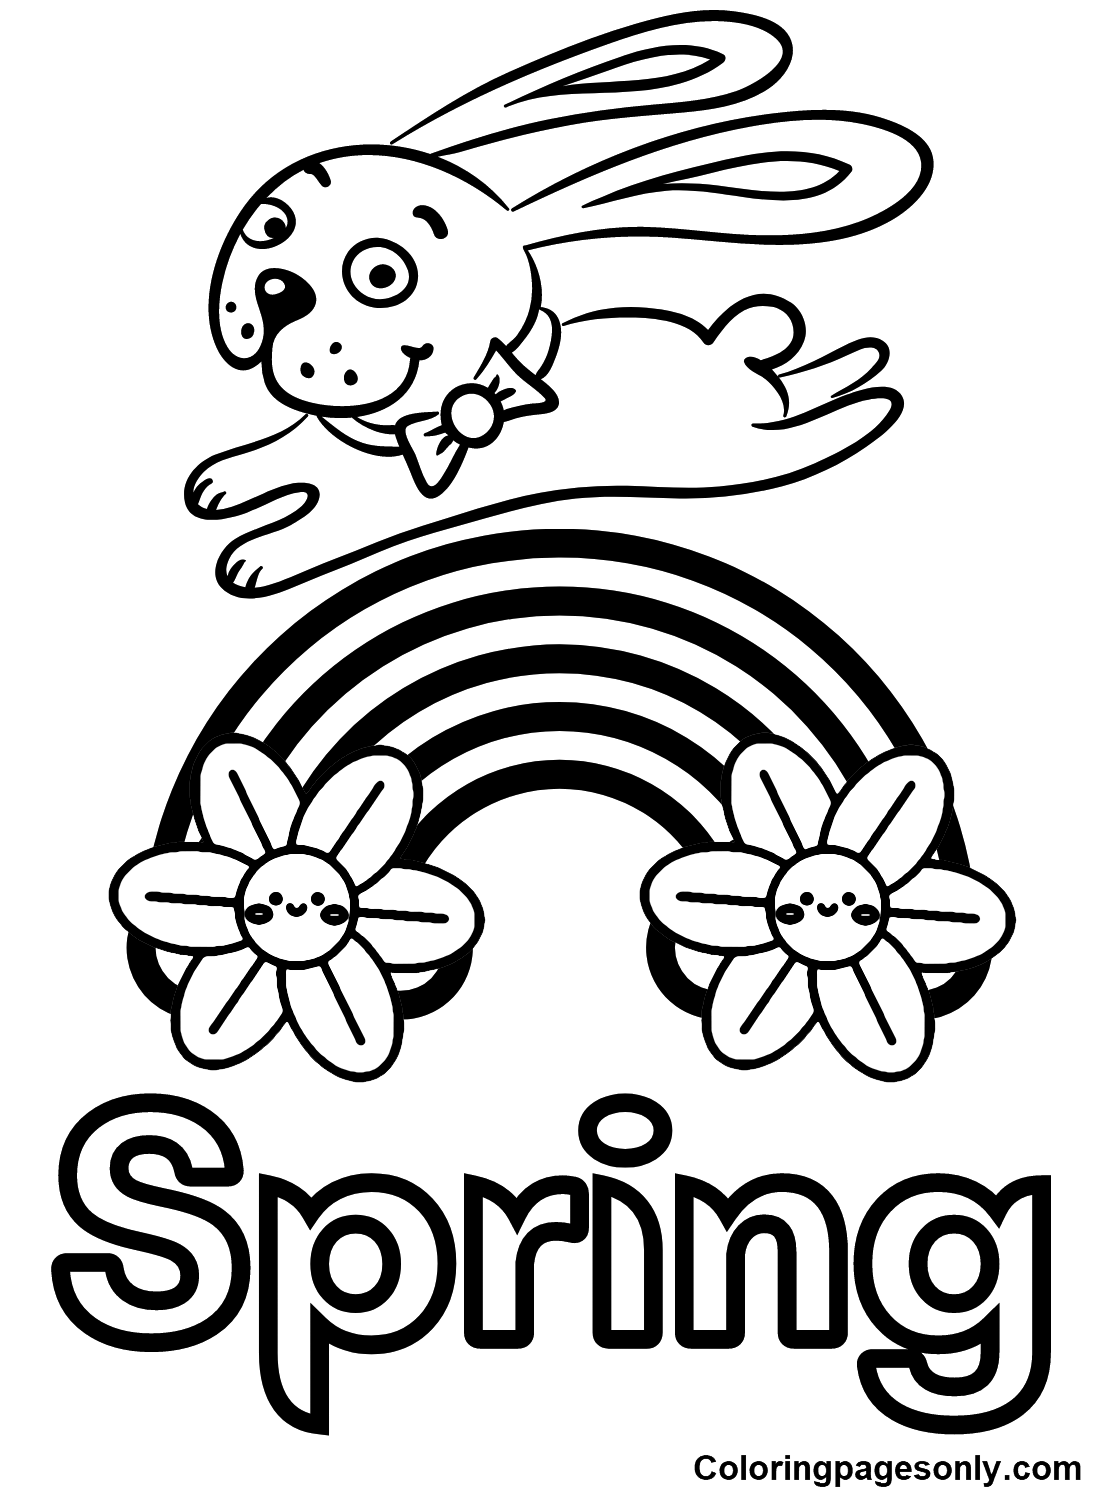 First Day of Spring with Bunny Coloring Page